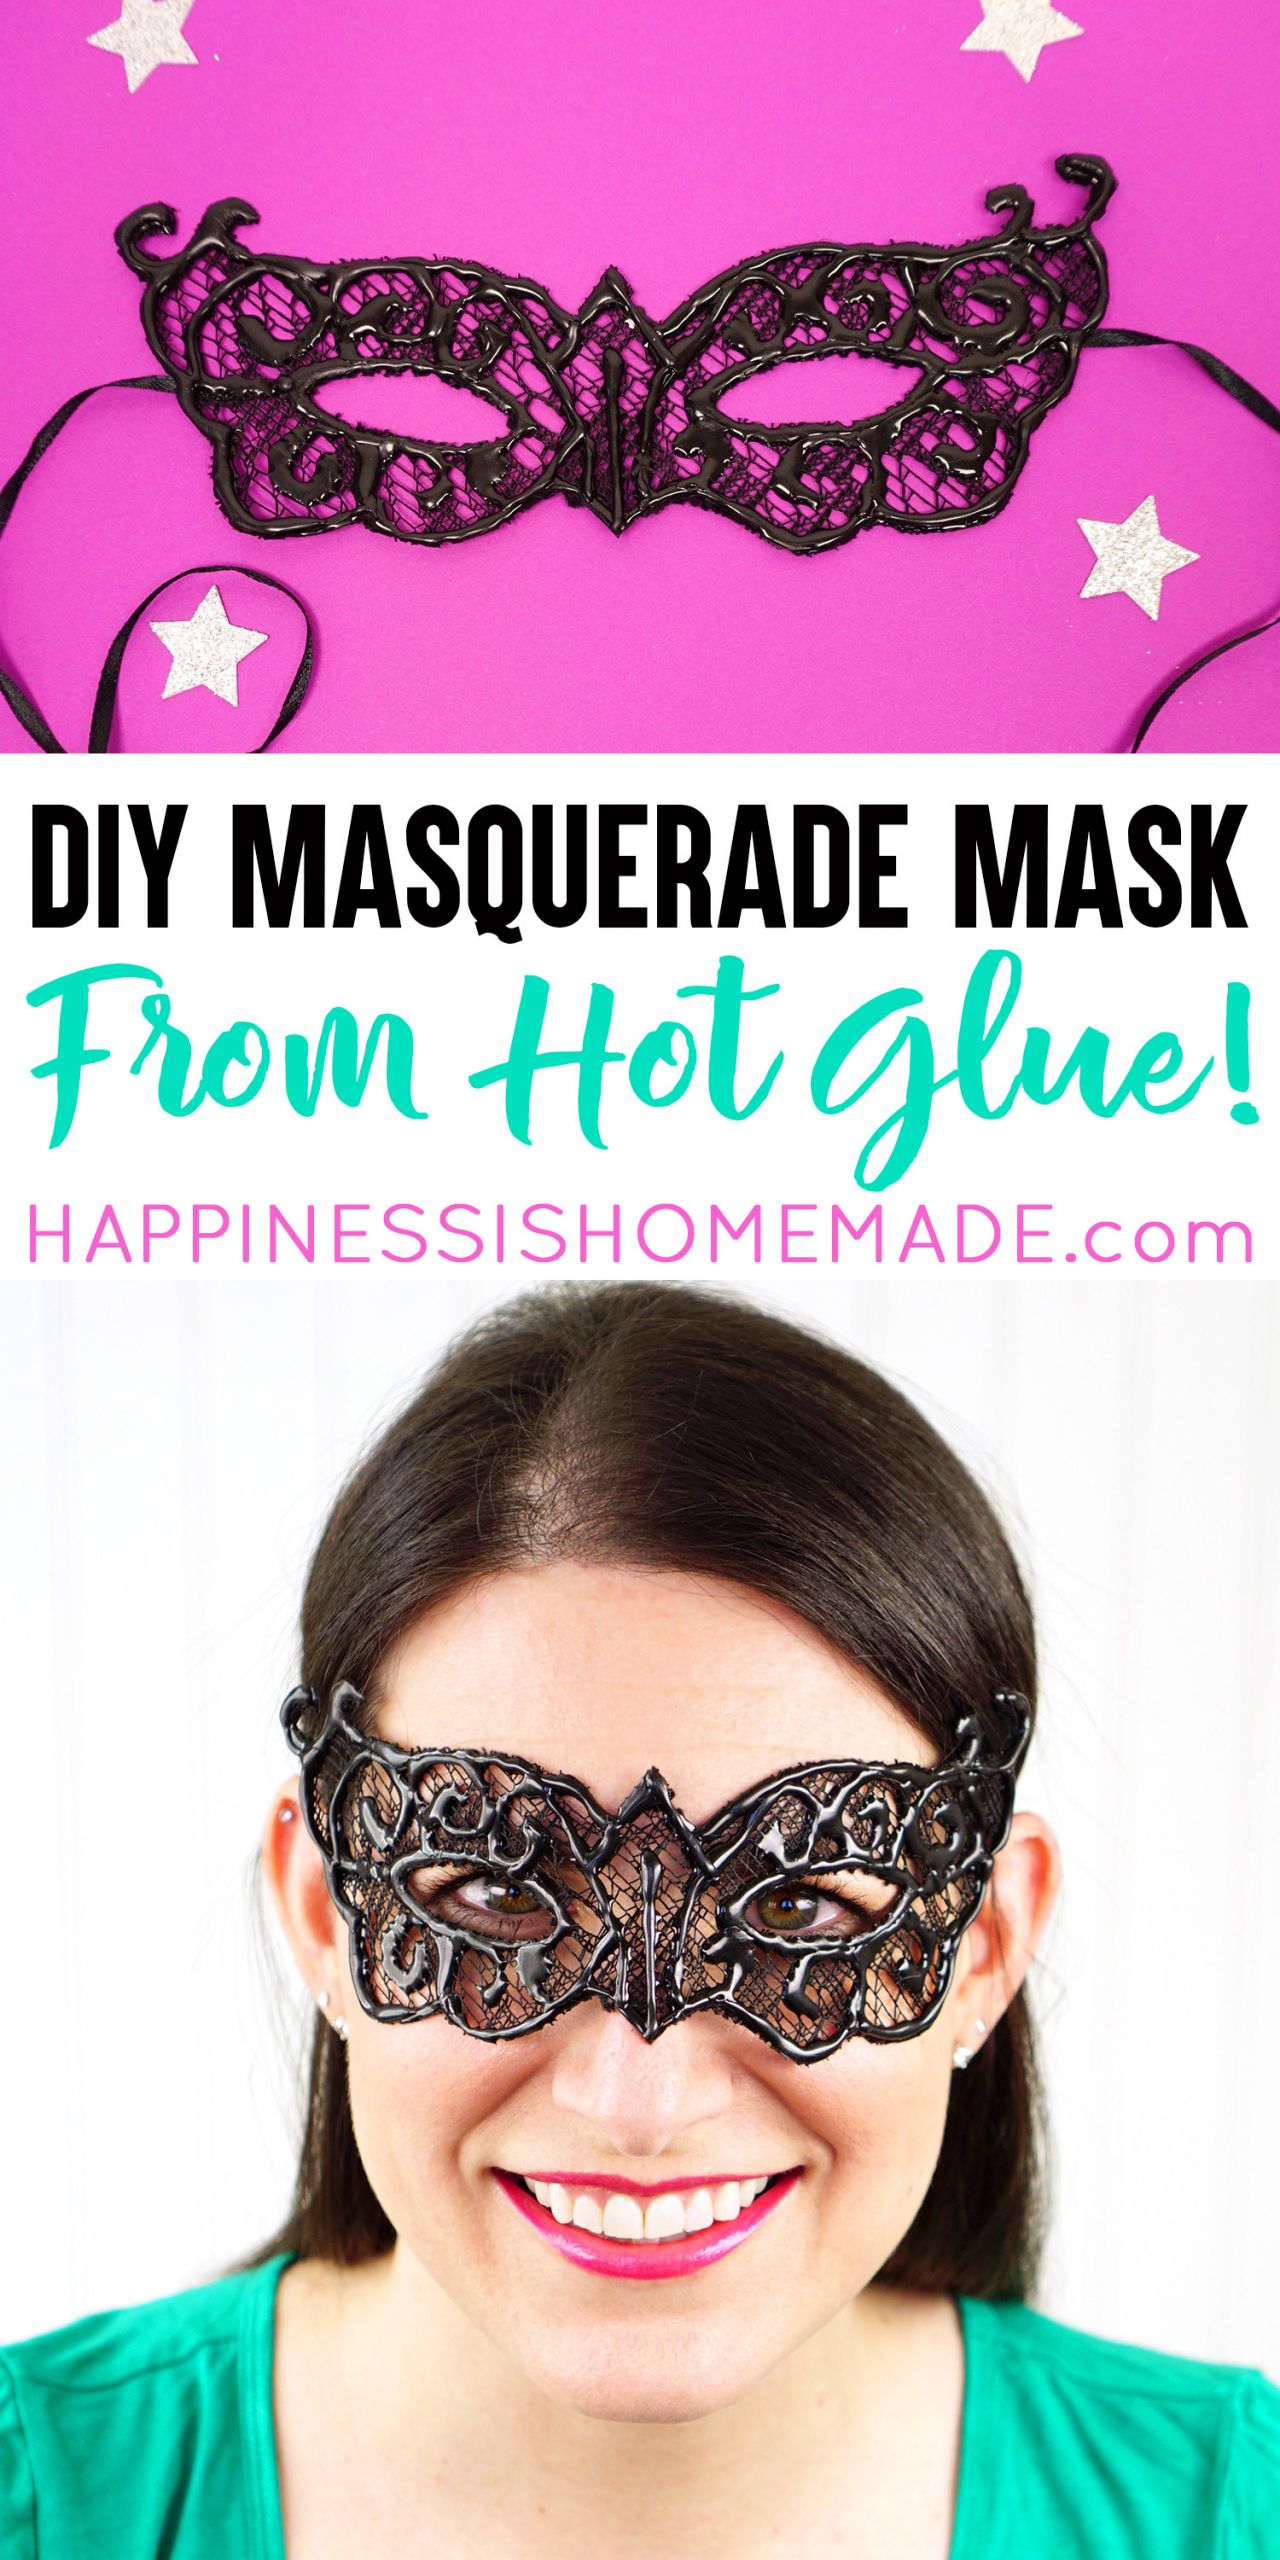 DIY Masquerade Mask
 Easy DIY Lace Masquerade Mask from Hot Glue Happiness is